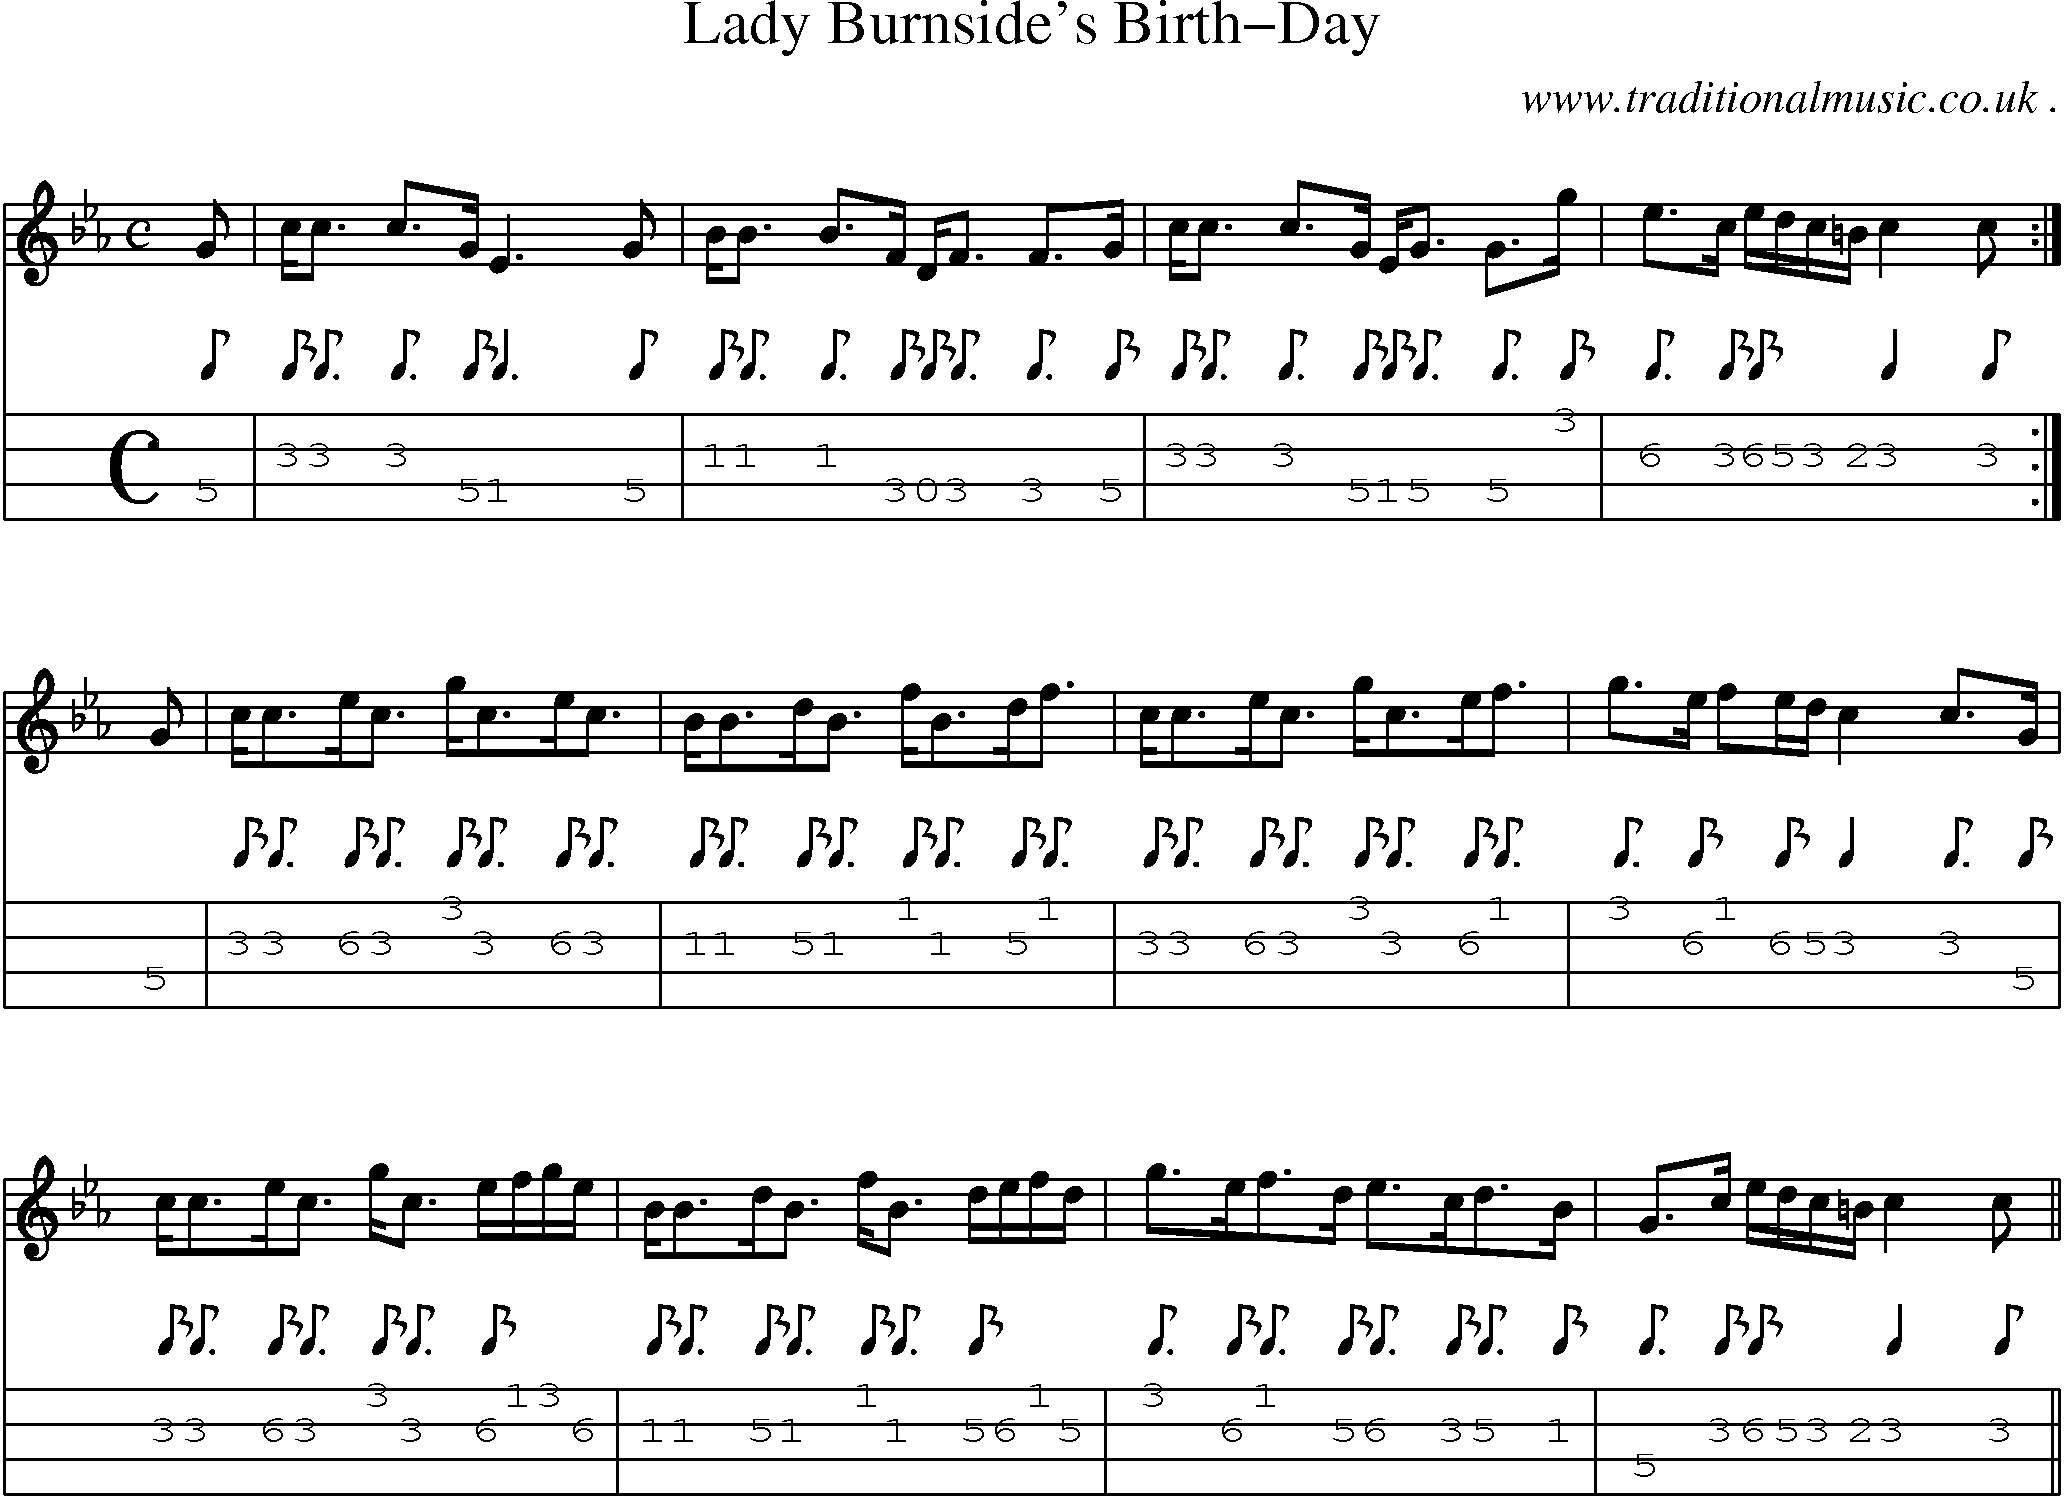 Sheet-music  score, Chords and Mandolin Tabs for Lady Burnsides Birth-day